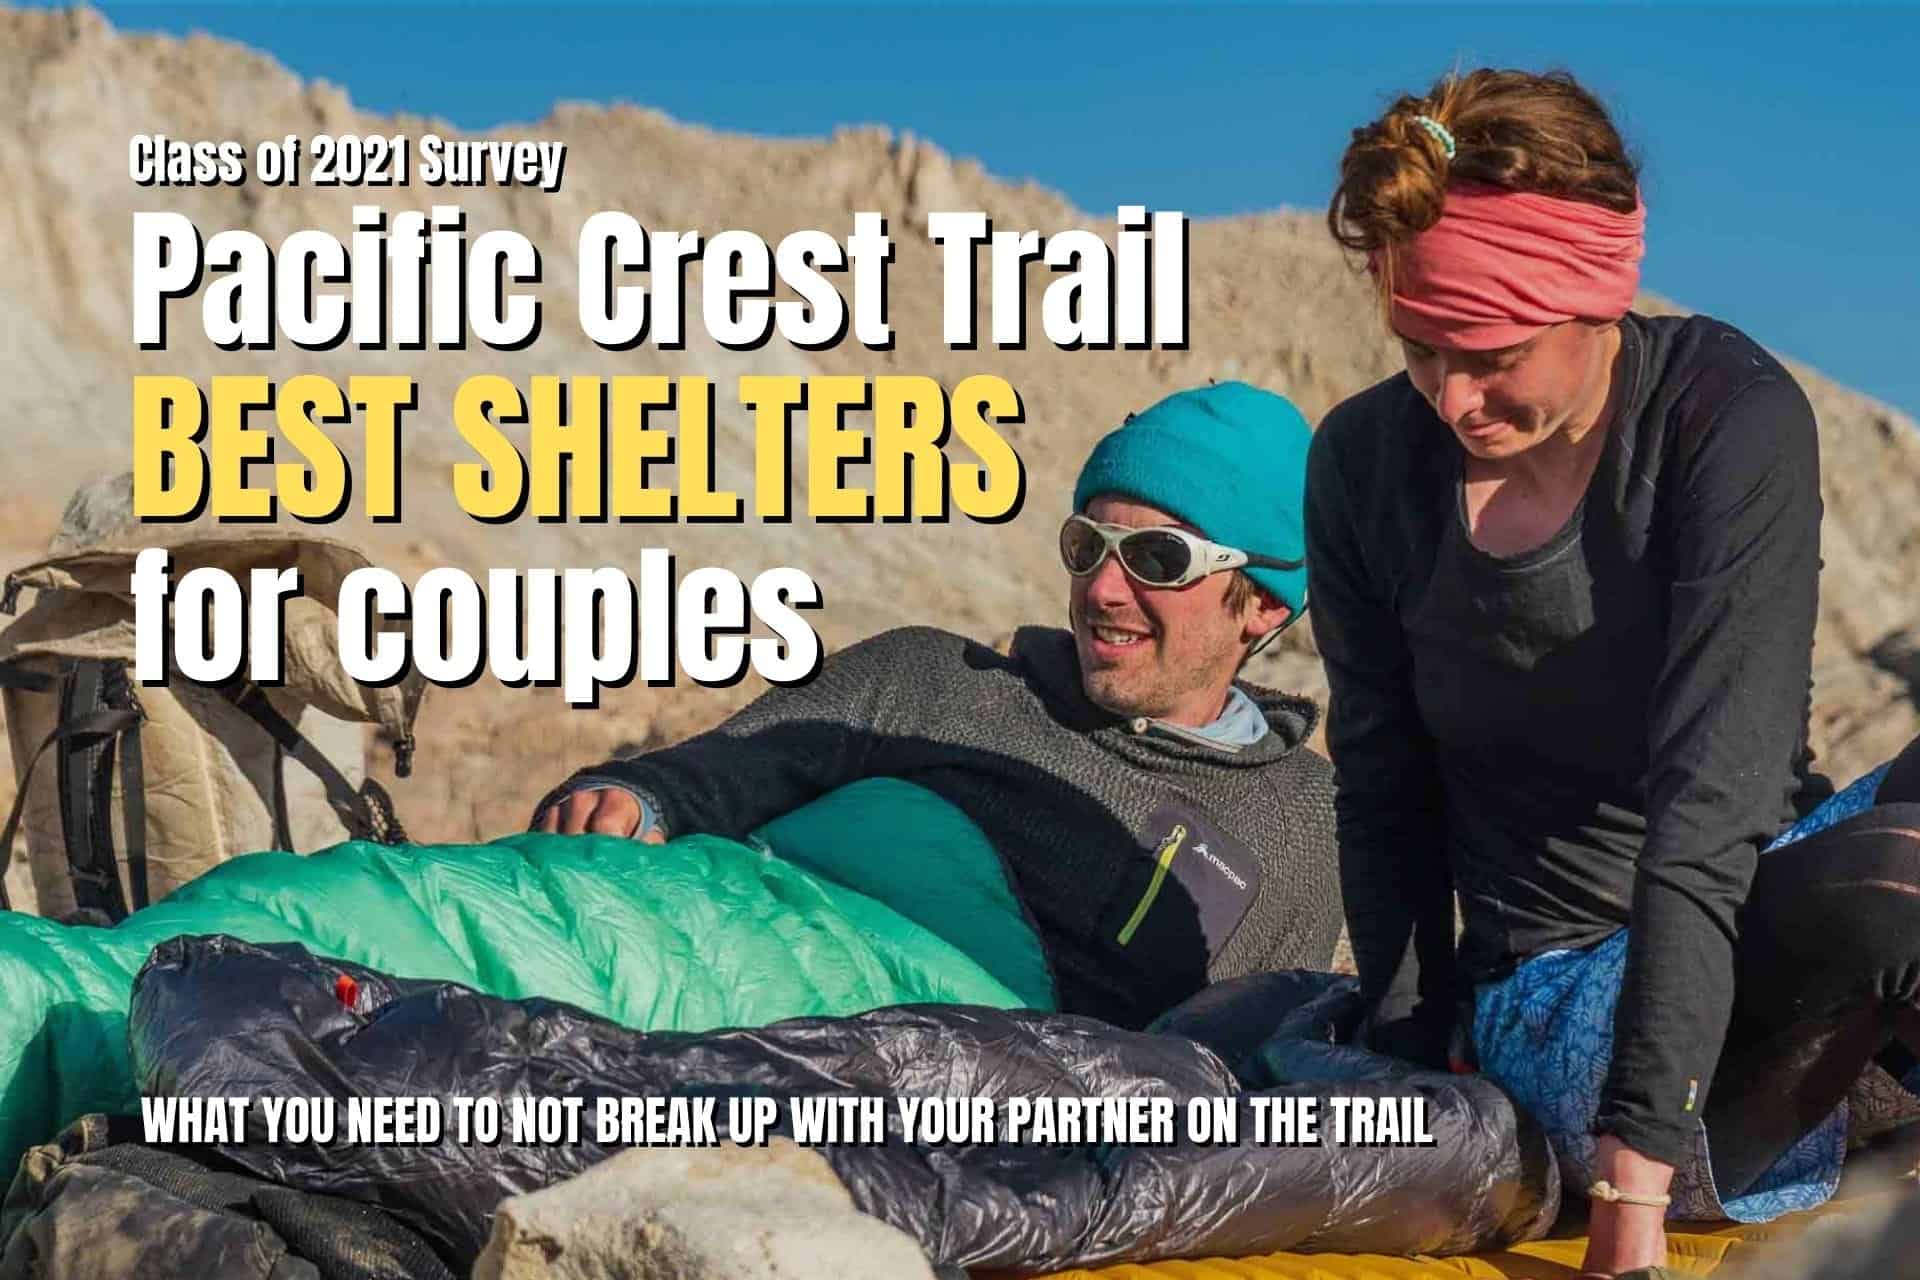 The Best Shelters for Couples on the Pacific Crest Trail (2021 Survey)